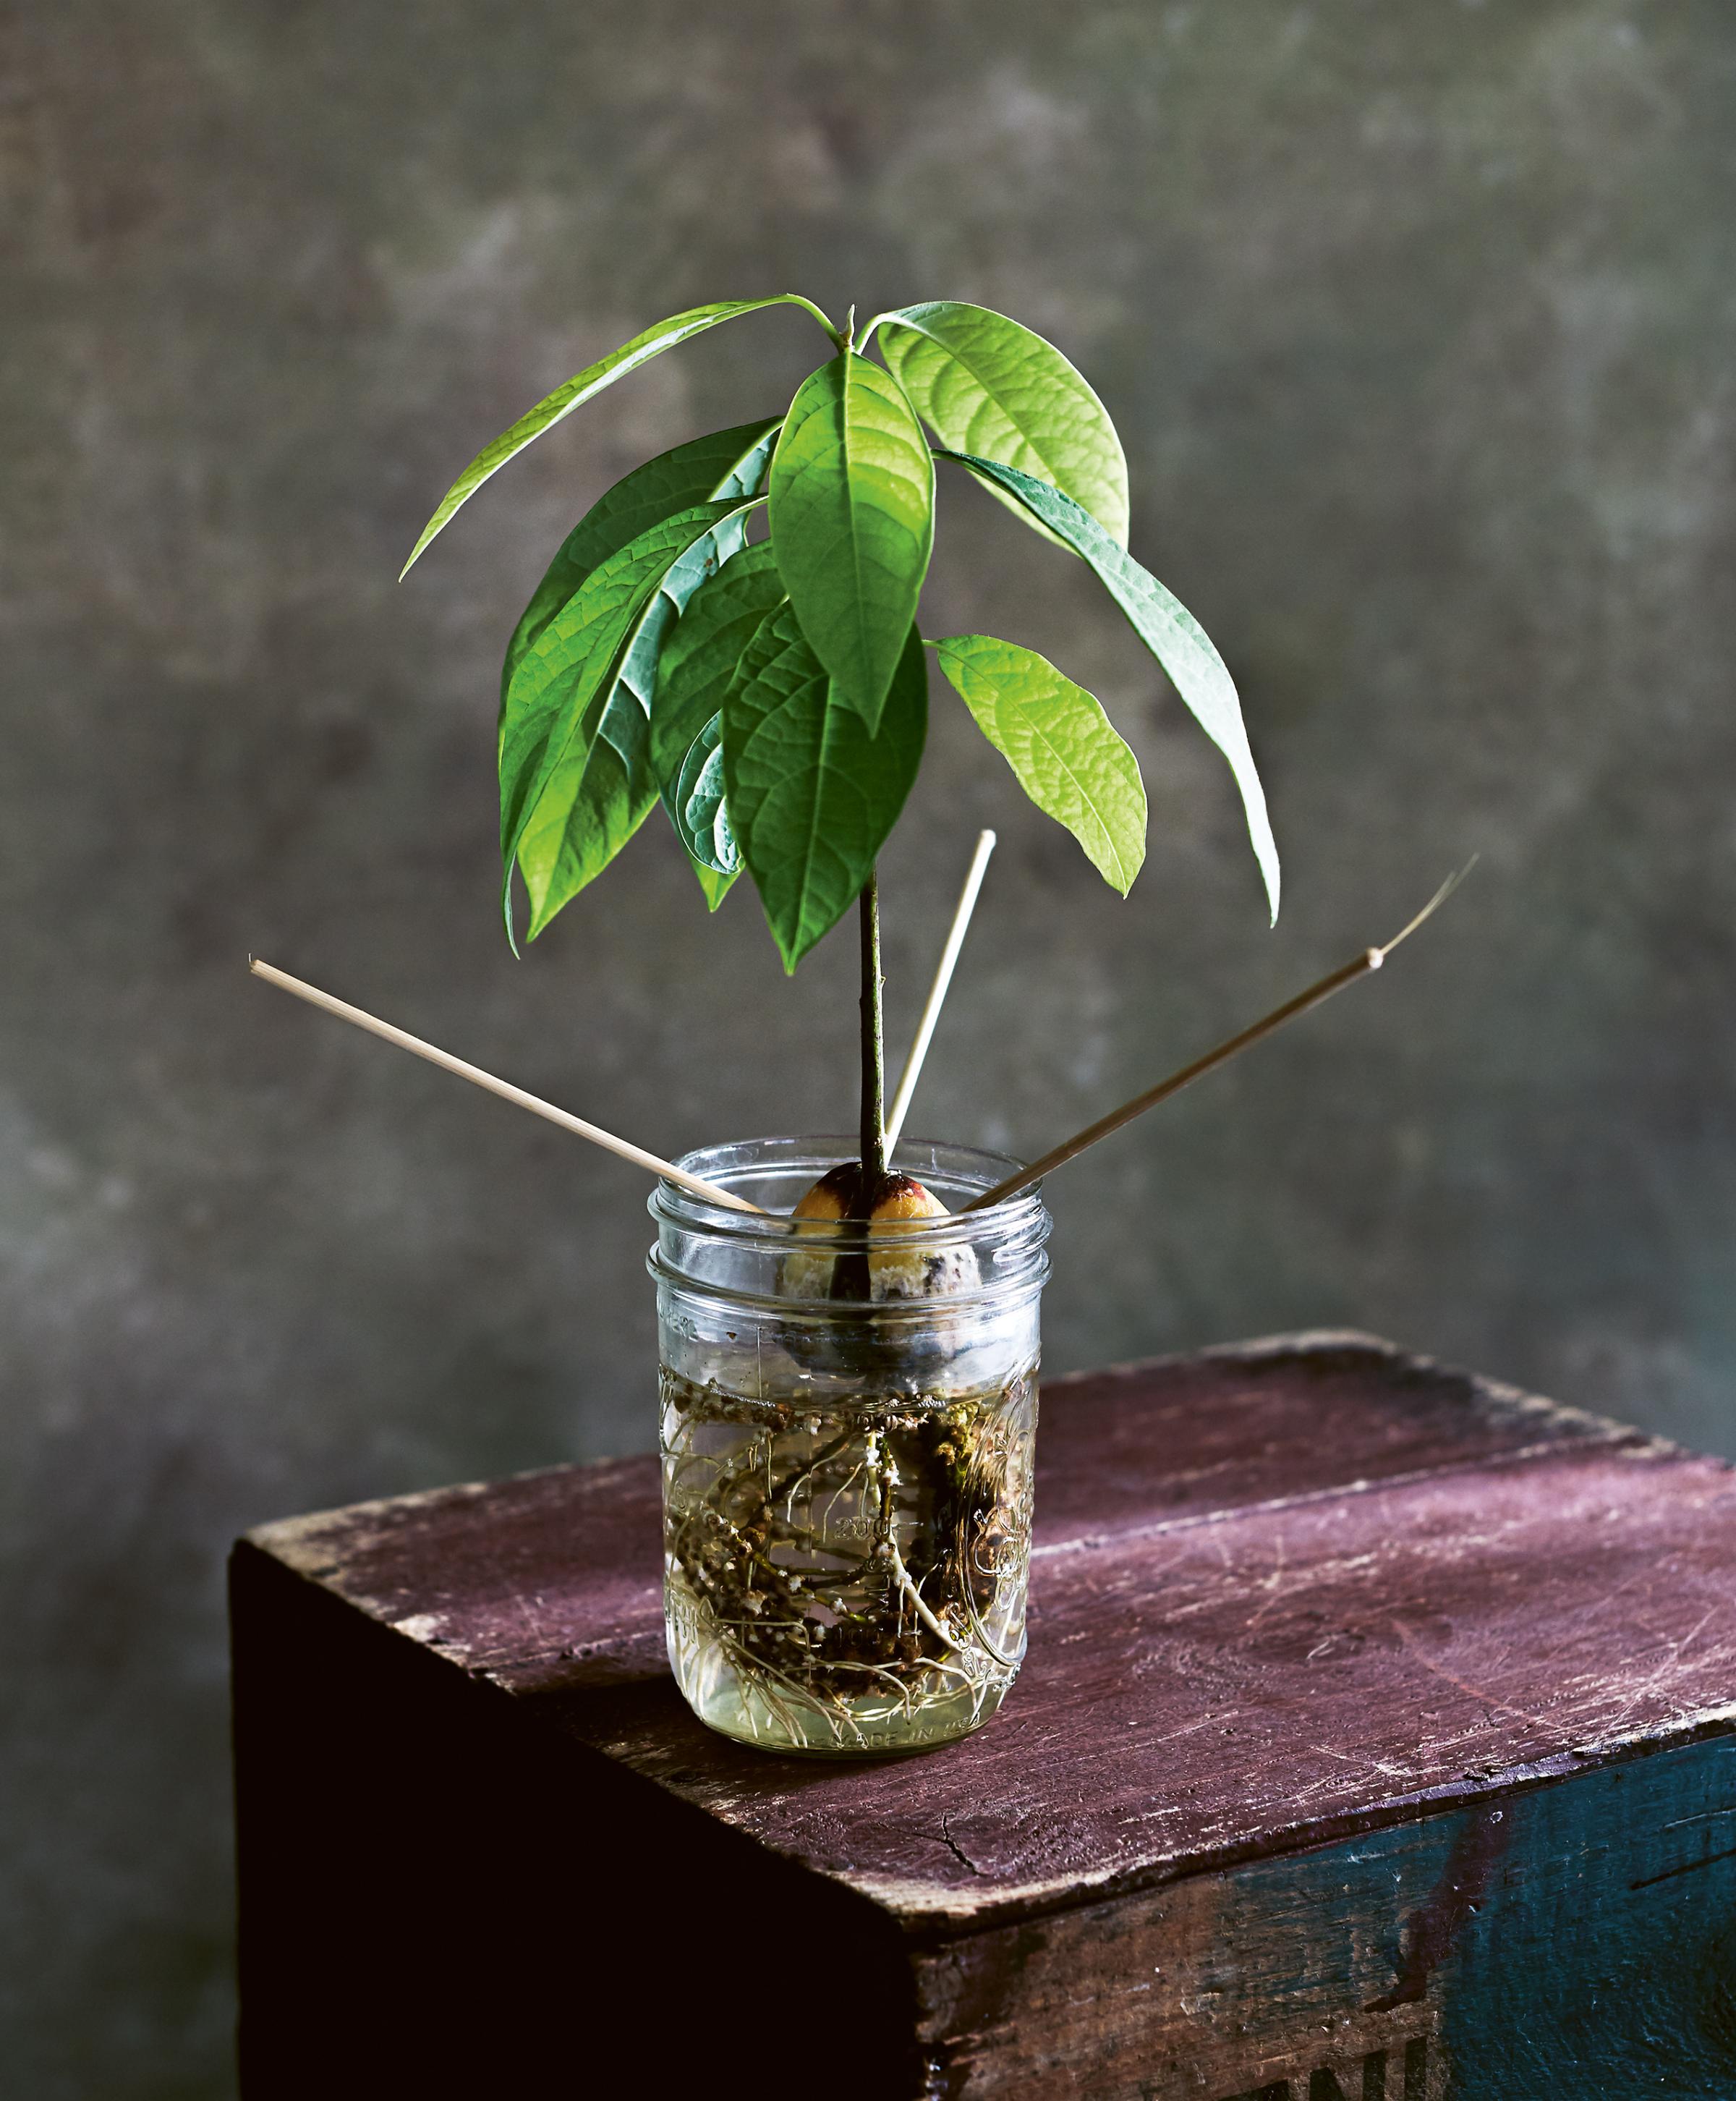 Undated Handout Photo of an avocado plant growing from a stone. See PA Feature GARDENING Advice Scraps. Picture credit should read: Kim Lightbody/PA. WARNING: This picture must only be used to accompany PA Feature GARDENING Advice Scraps.